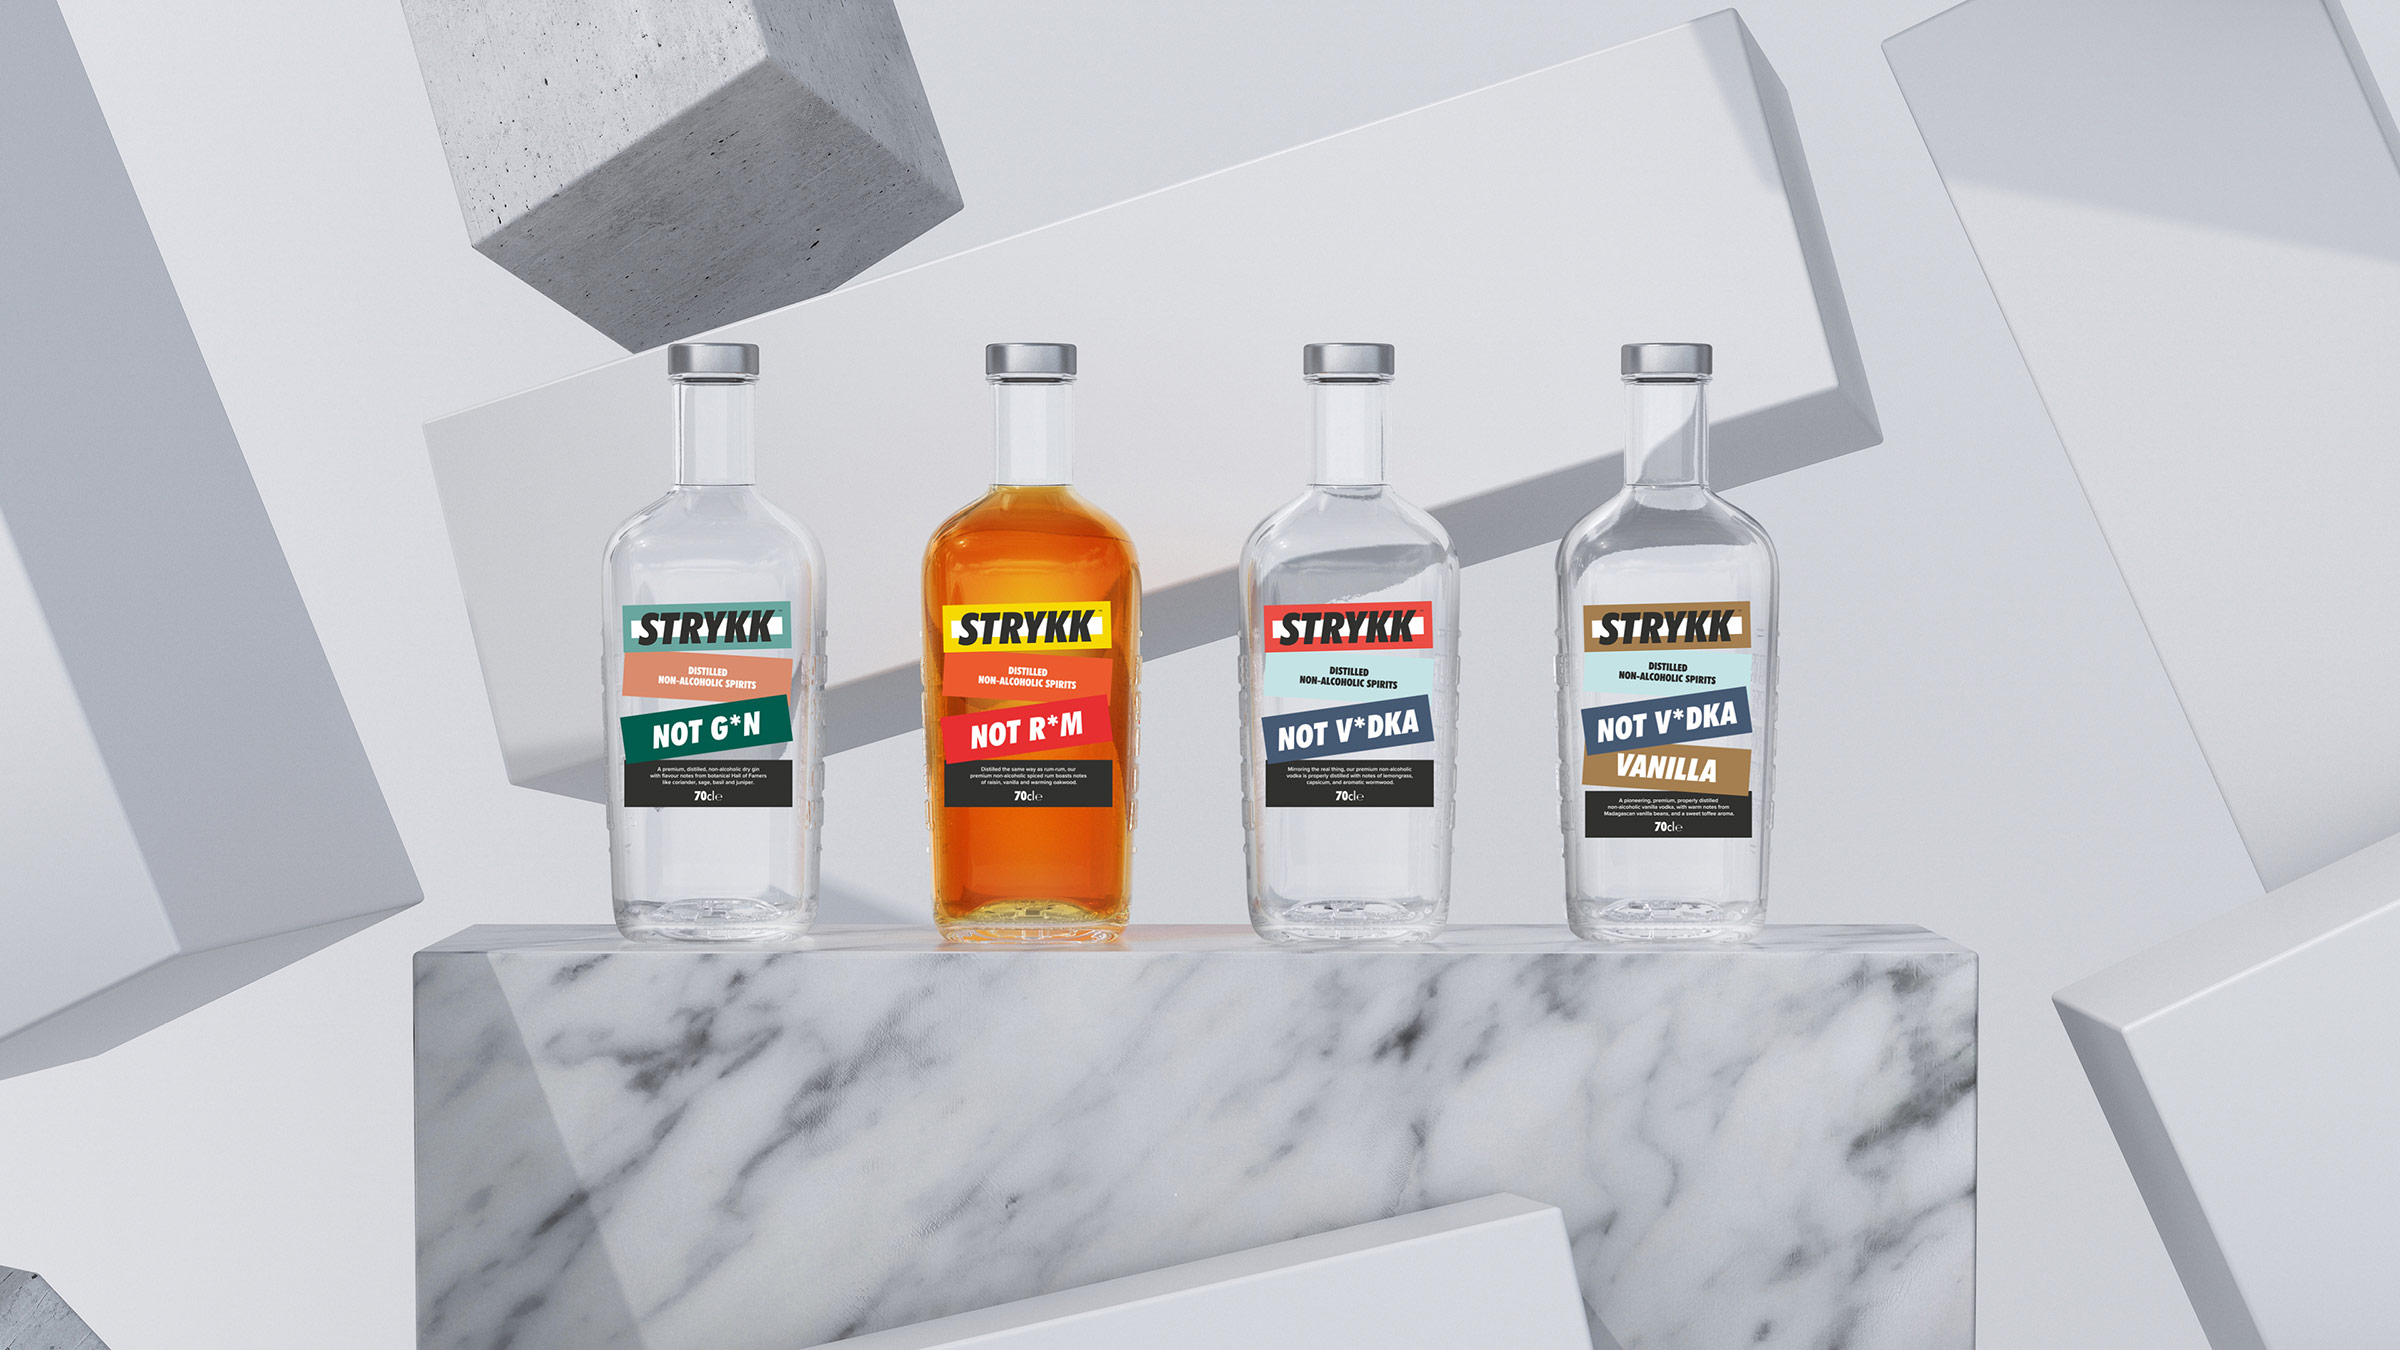 New Brand Identity and Packaging Design for Strykk